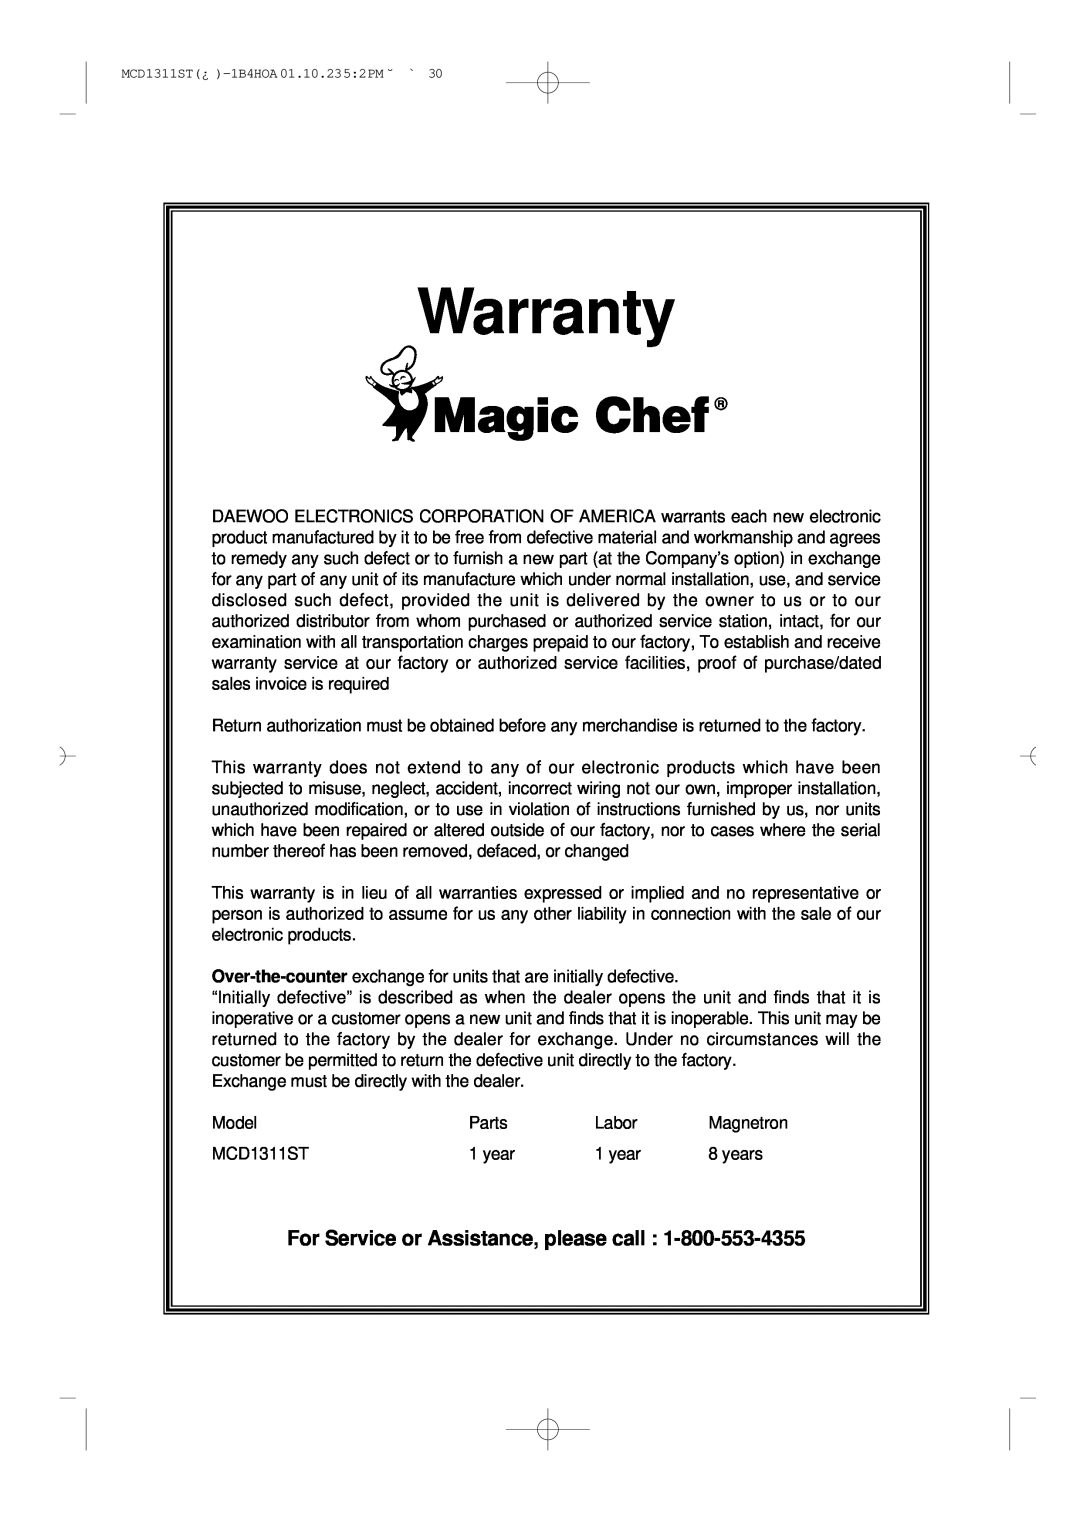 Magic Chef MCD1311ST manual For Service or Assistance, please call, Warranty 